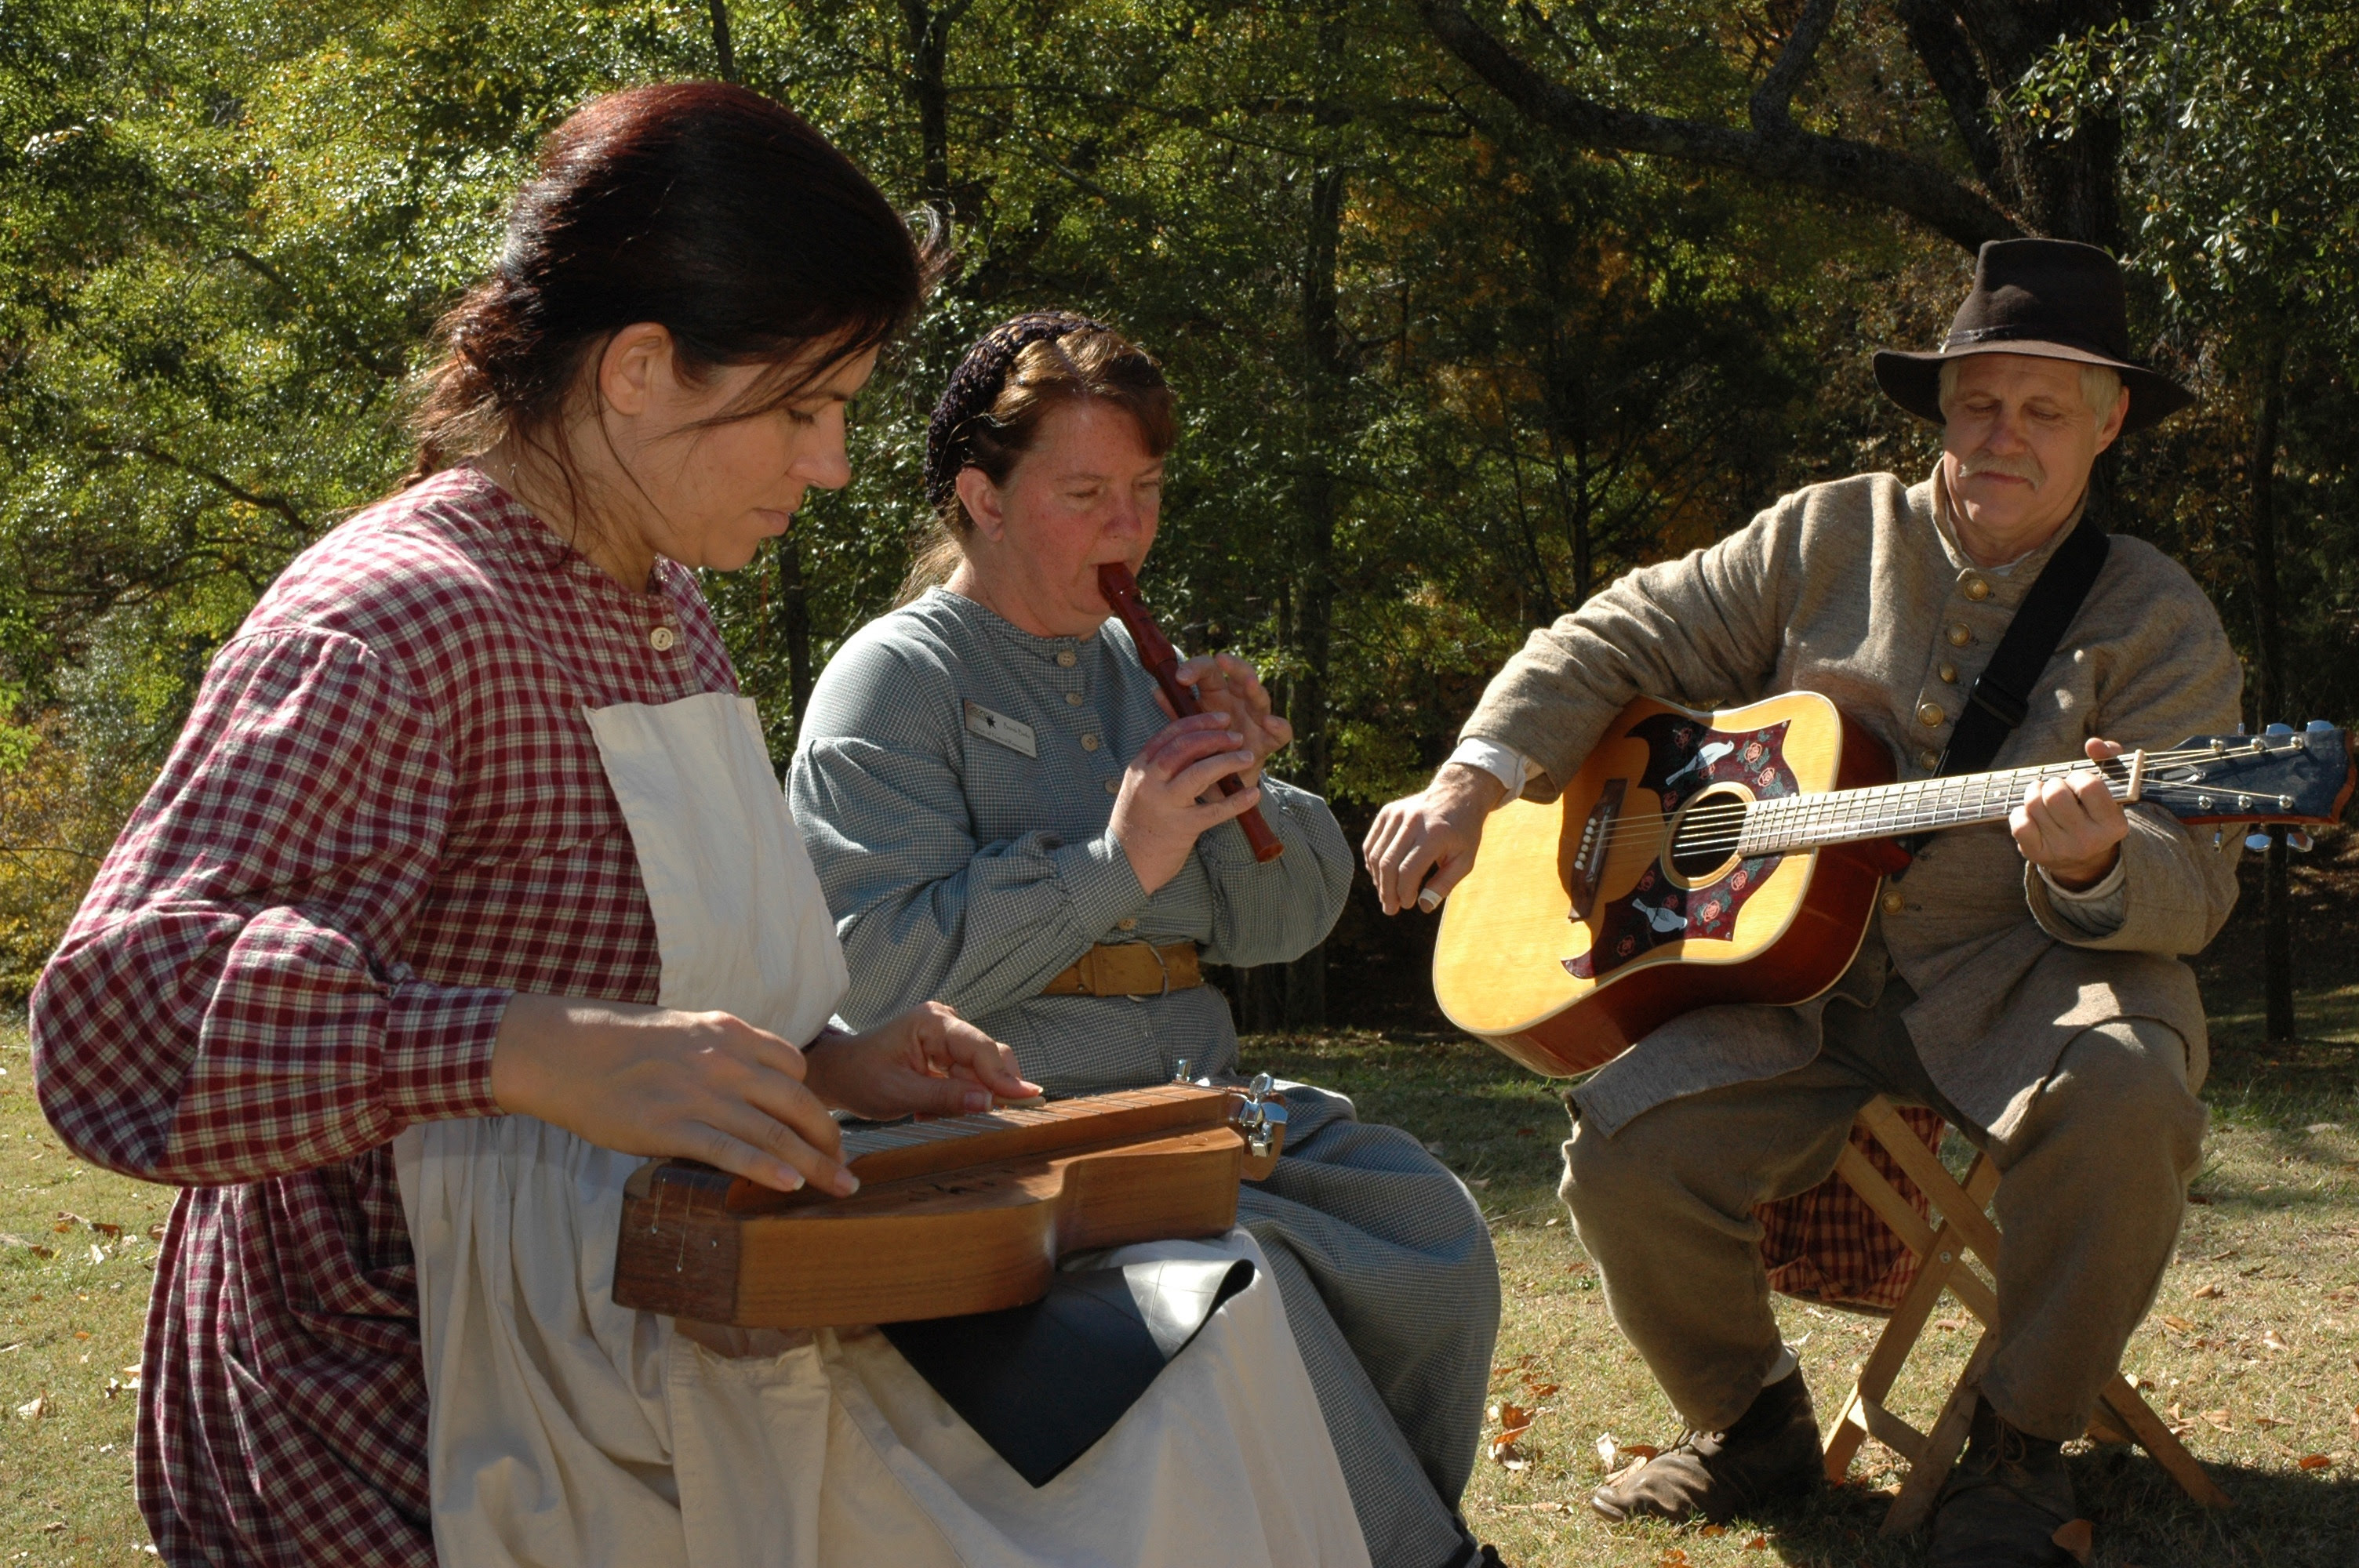 October 2014 events at Georgia State Parks